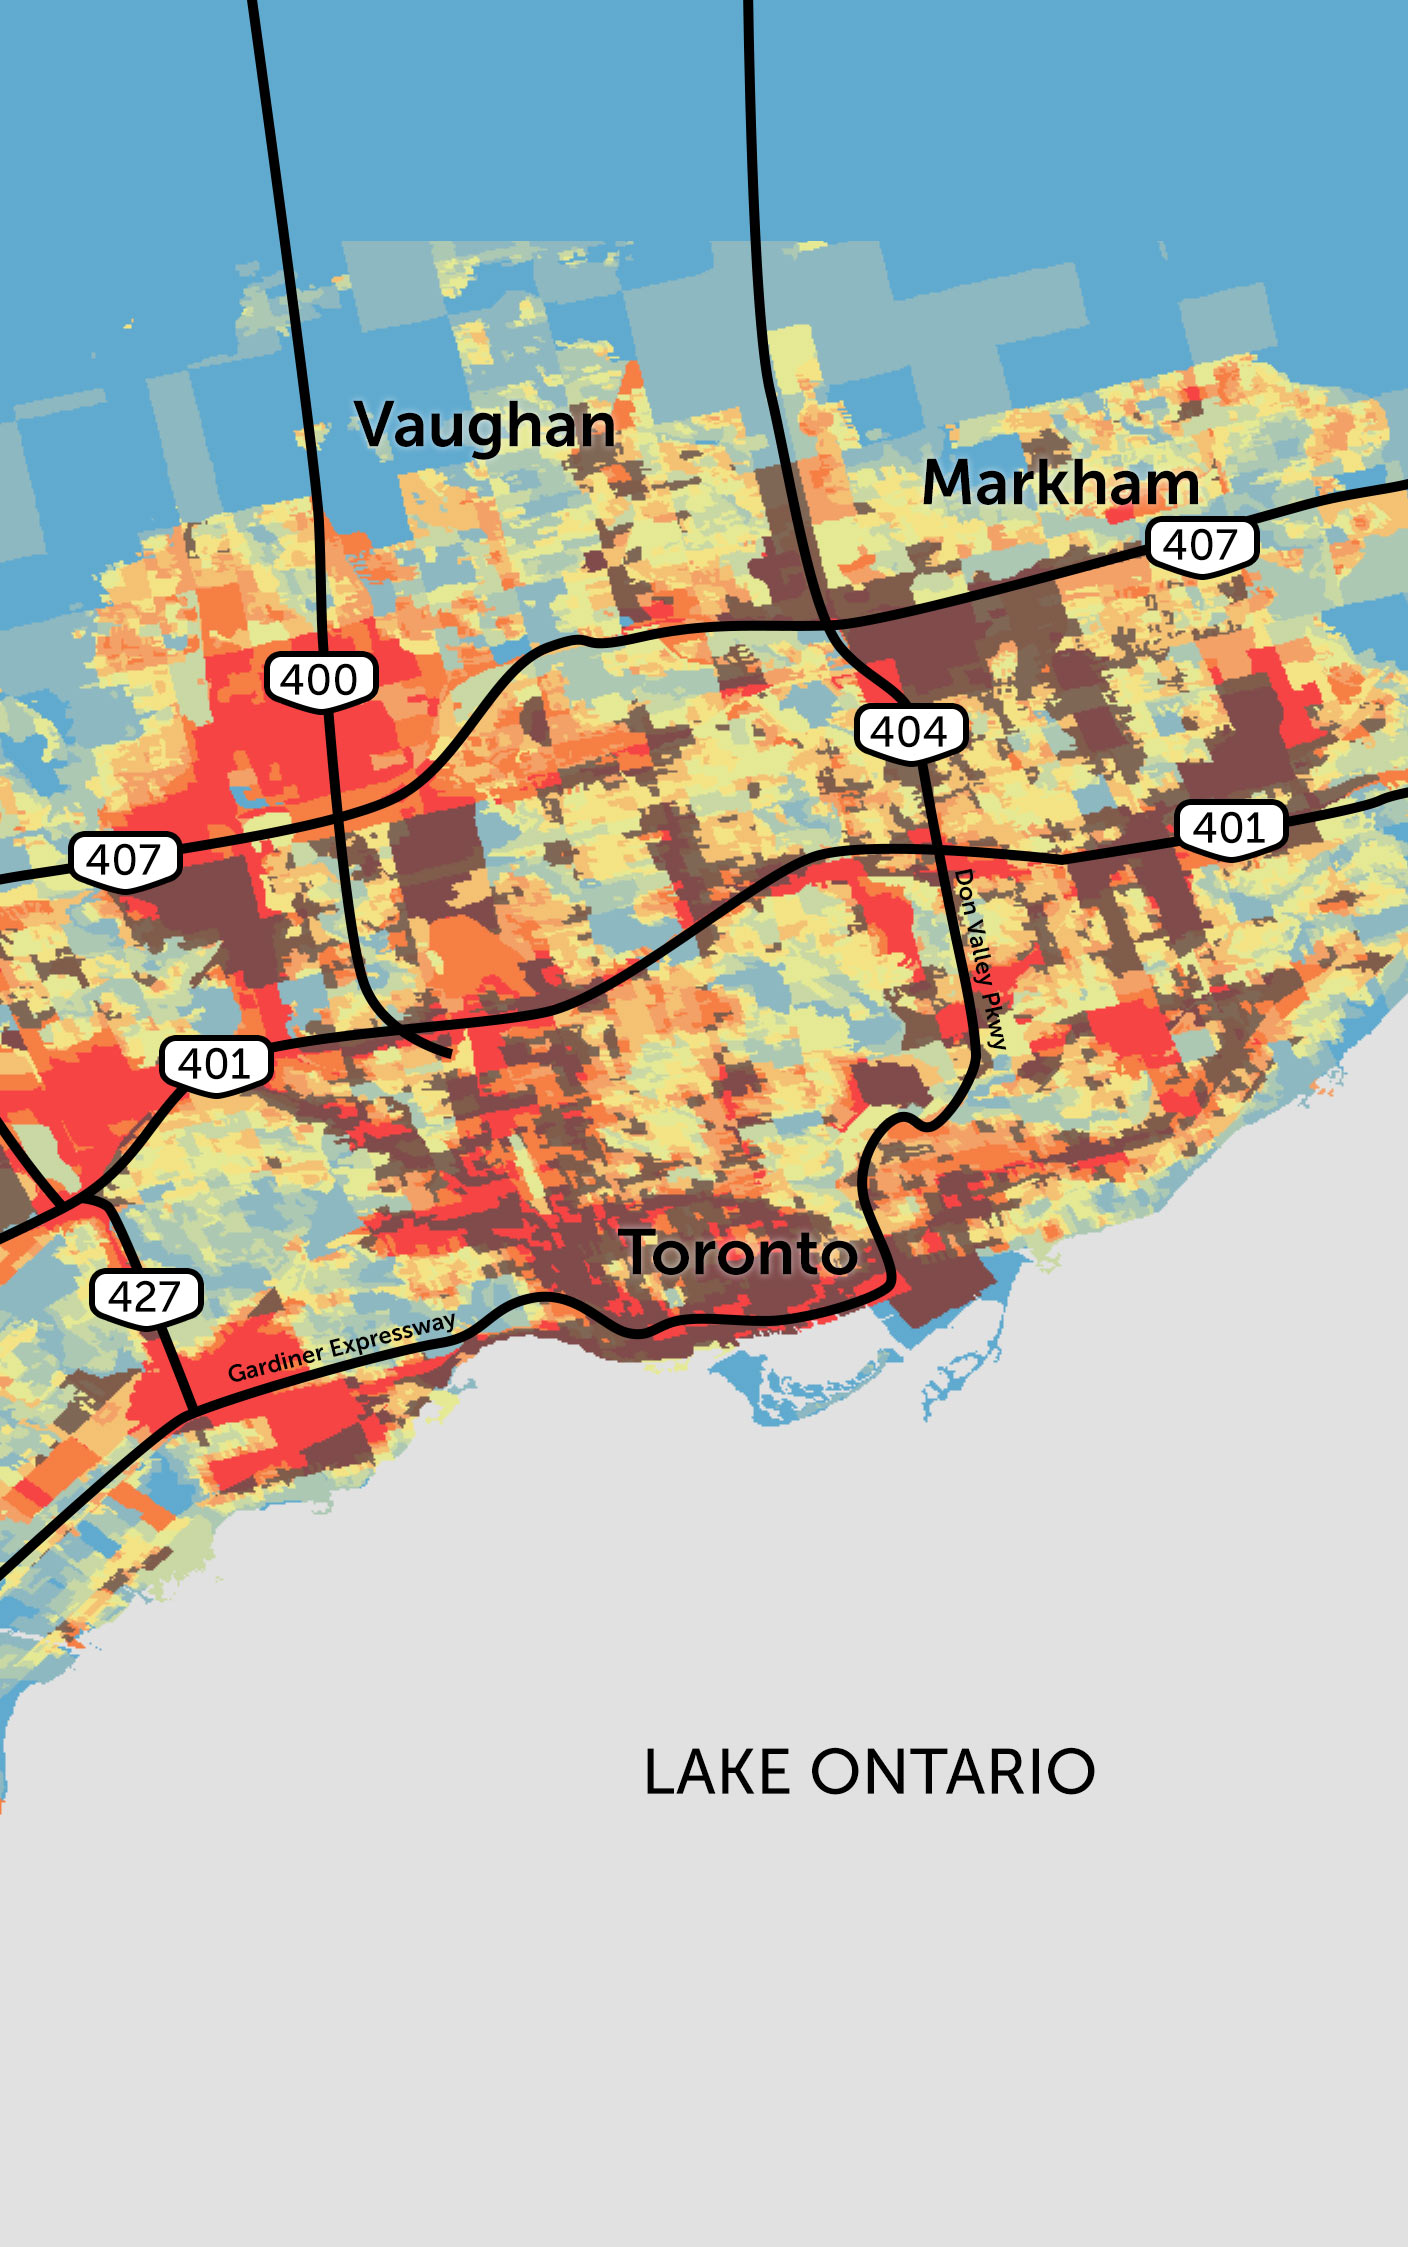 A map showing Greater Toronto Area highways and clusters of air pollution and residents with lower-socioeconomic status around them.